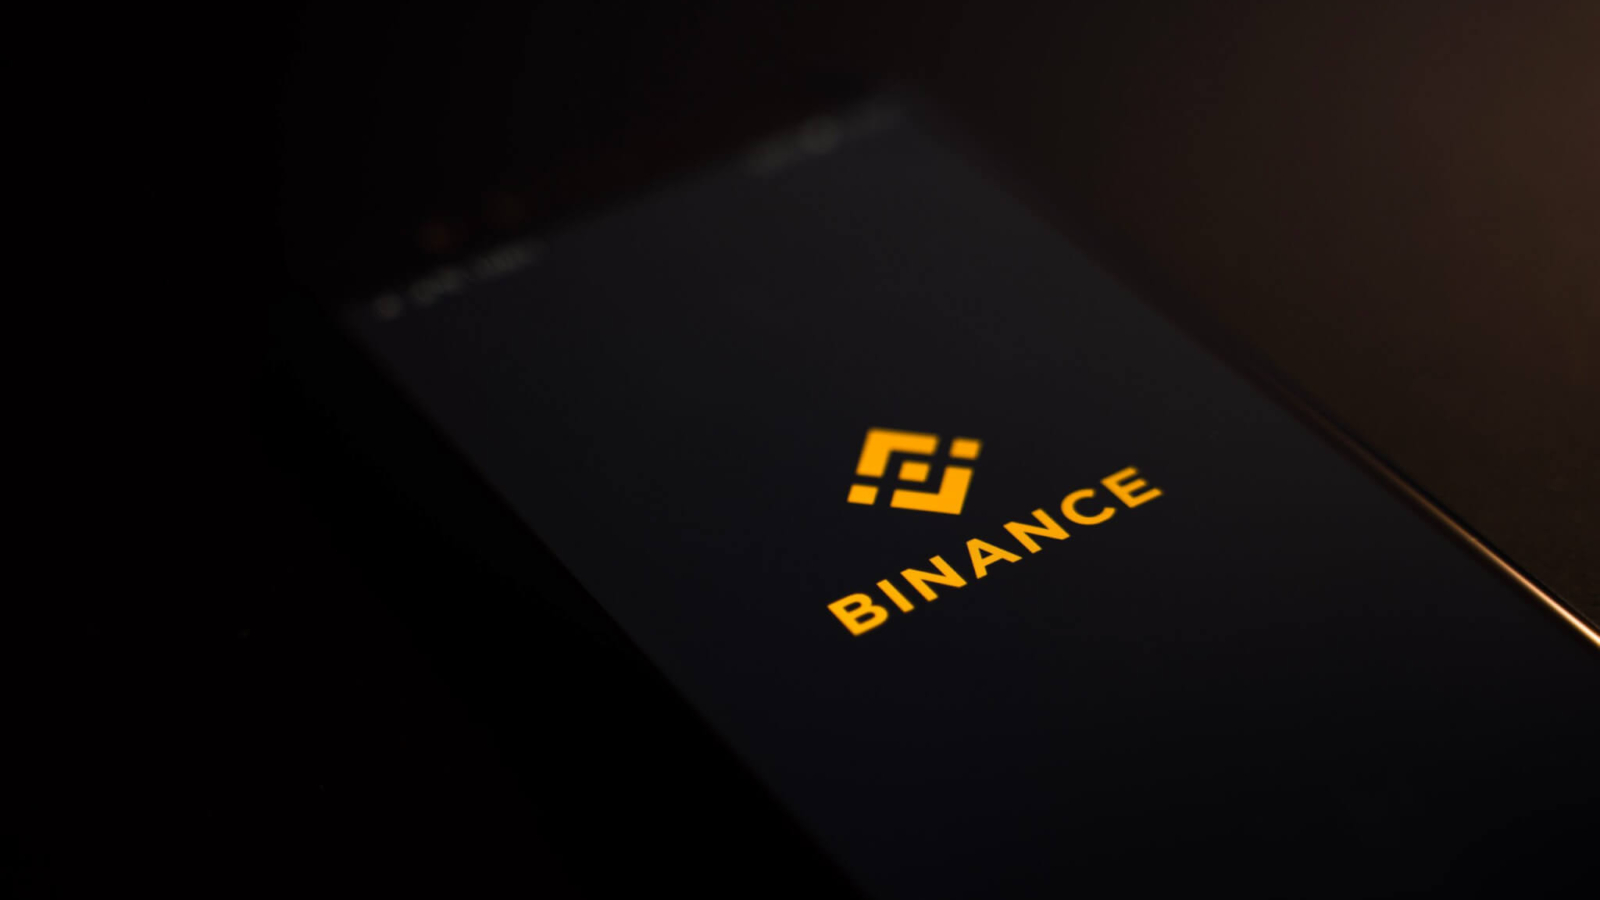 Binance Newsletter! Reasons Why You Should Join